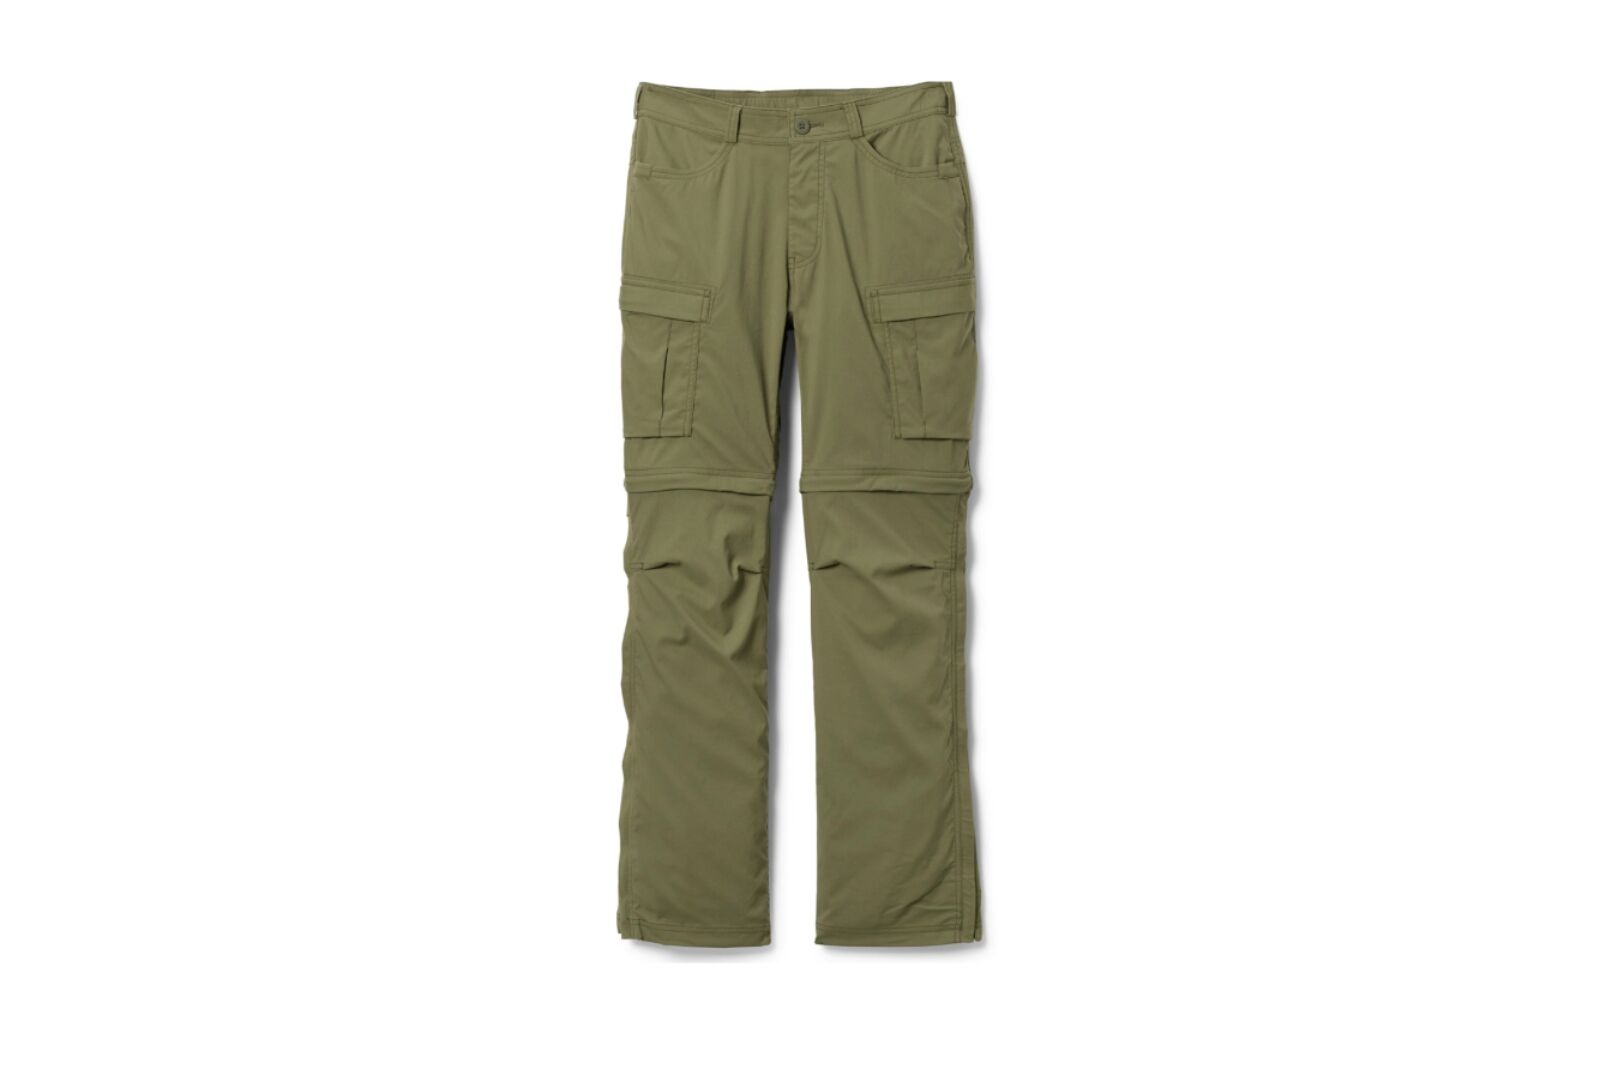 Roll up pants for african safari 